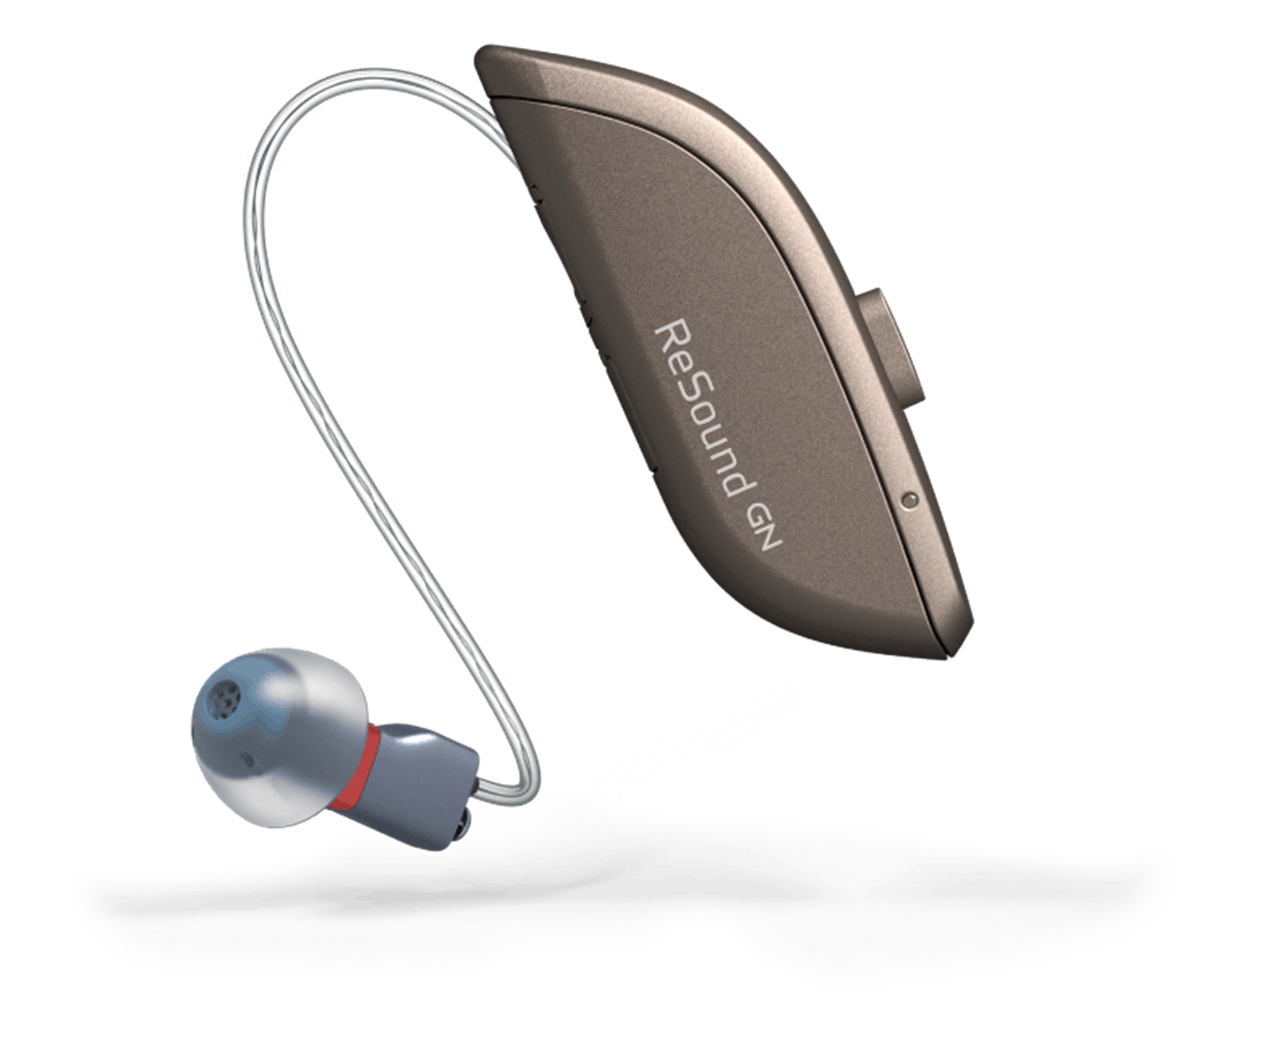 resound app for hearing aids